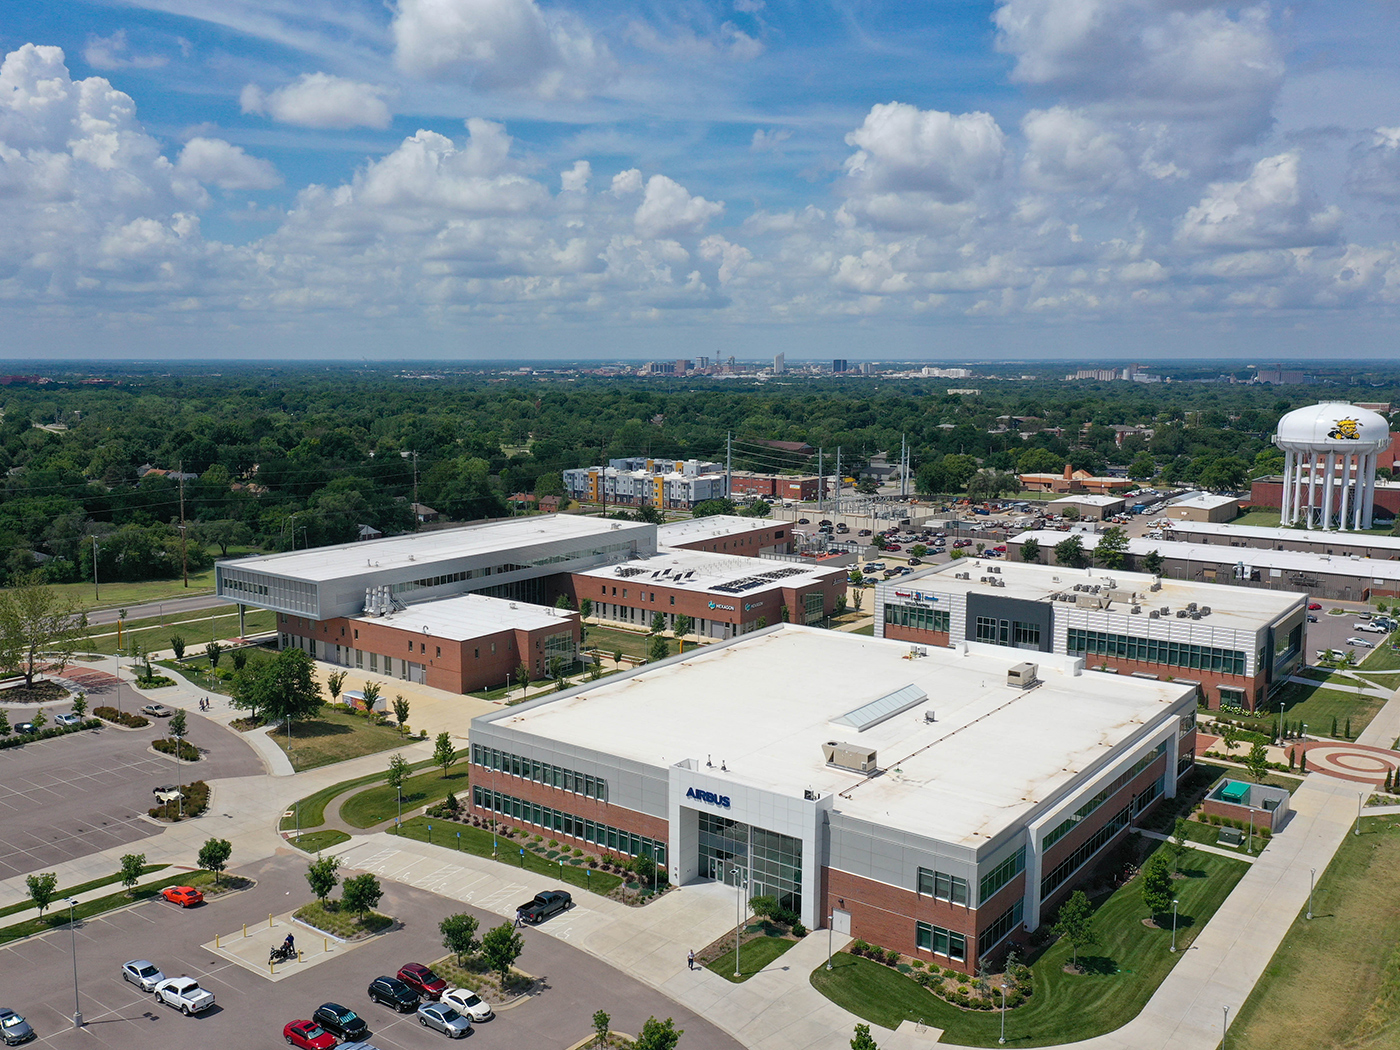 Aerial view of the innovation campus looking southwest toward downtown Wichita.